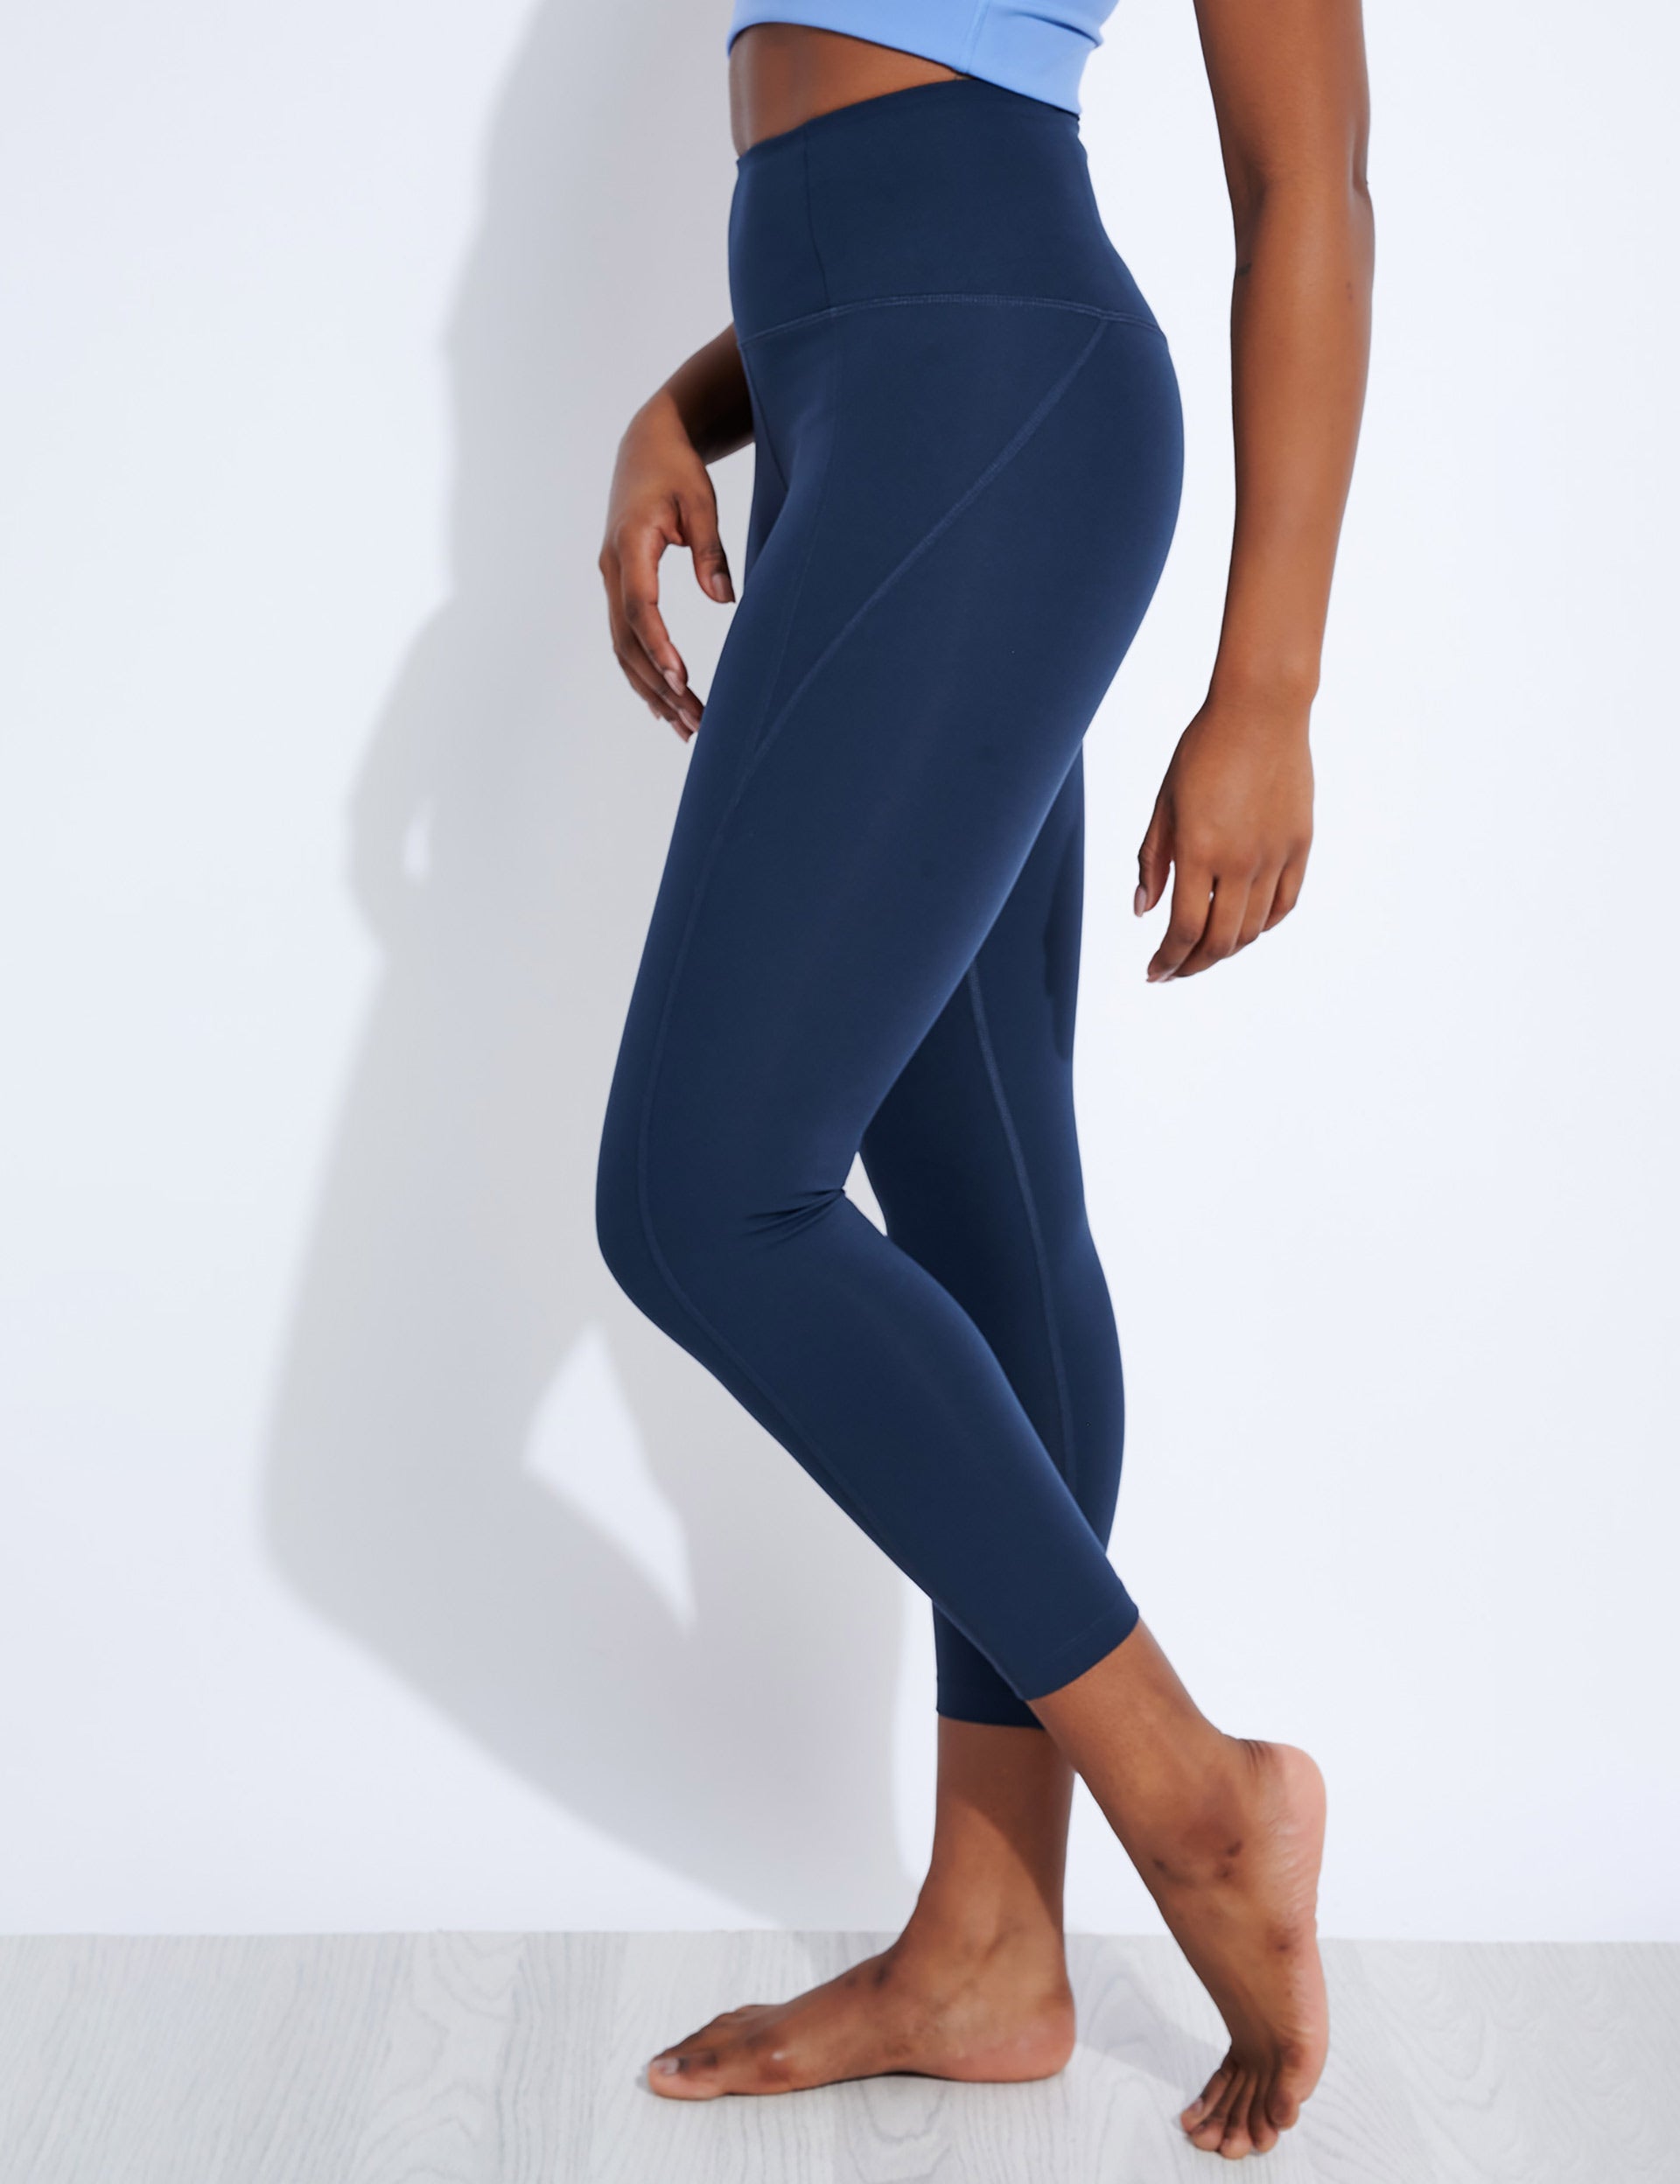 Girlfriend Collective Navy Blue High Rise Compressive Leggings